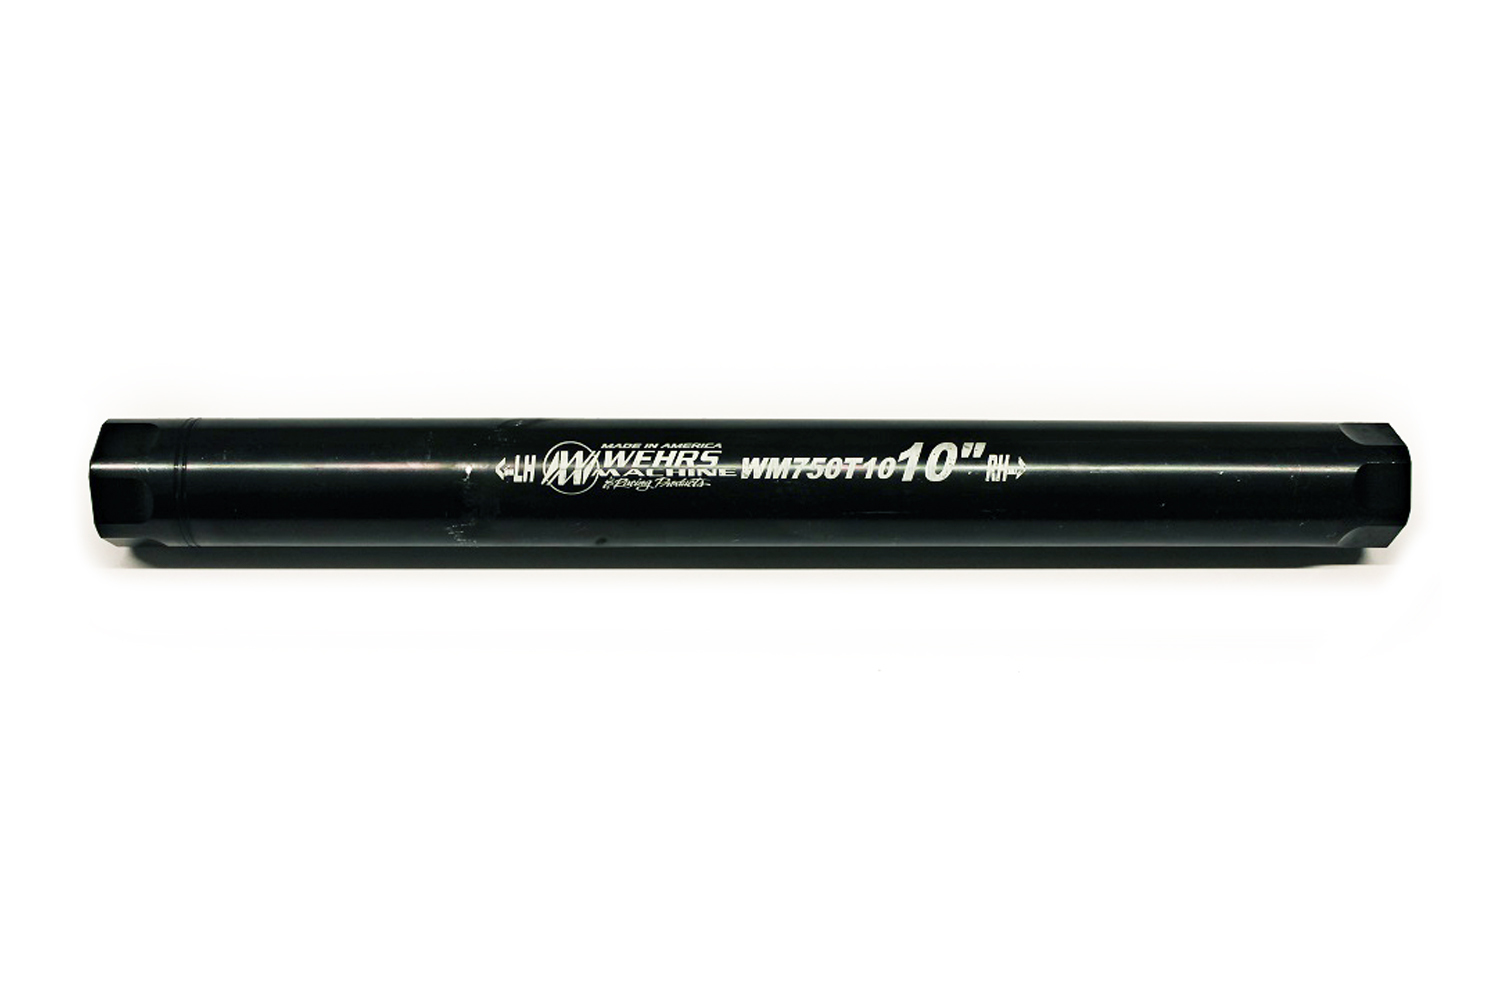 Wehrs Machine WM750T10 - Suspension Tube, 1 in OD, 10 in Long, 3/4-16 in Female Threads, Steel, Black Oxide, Each